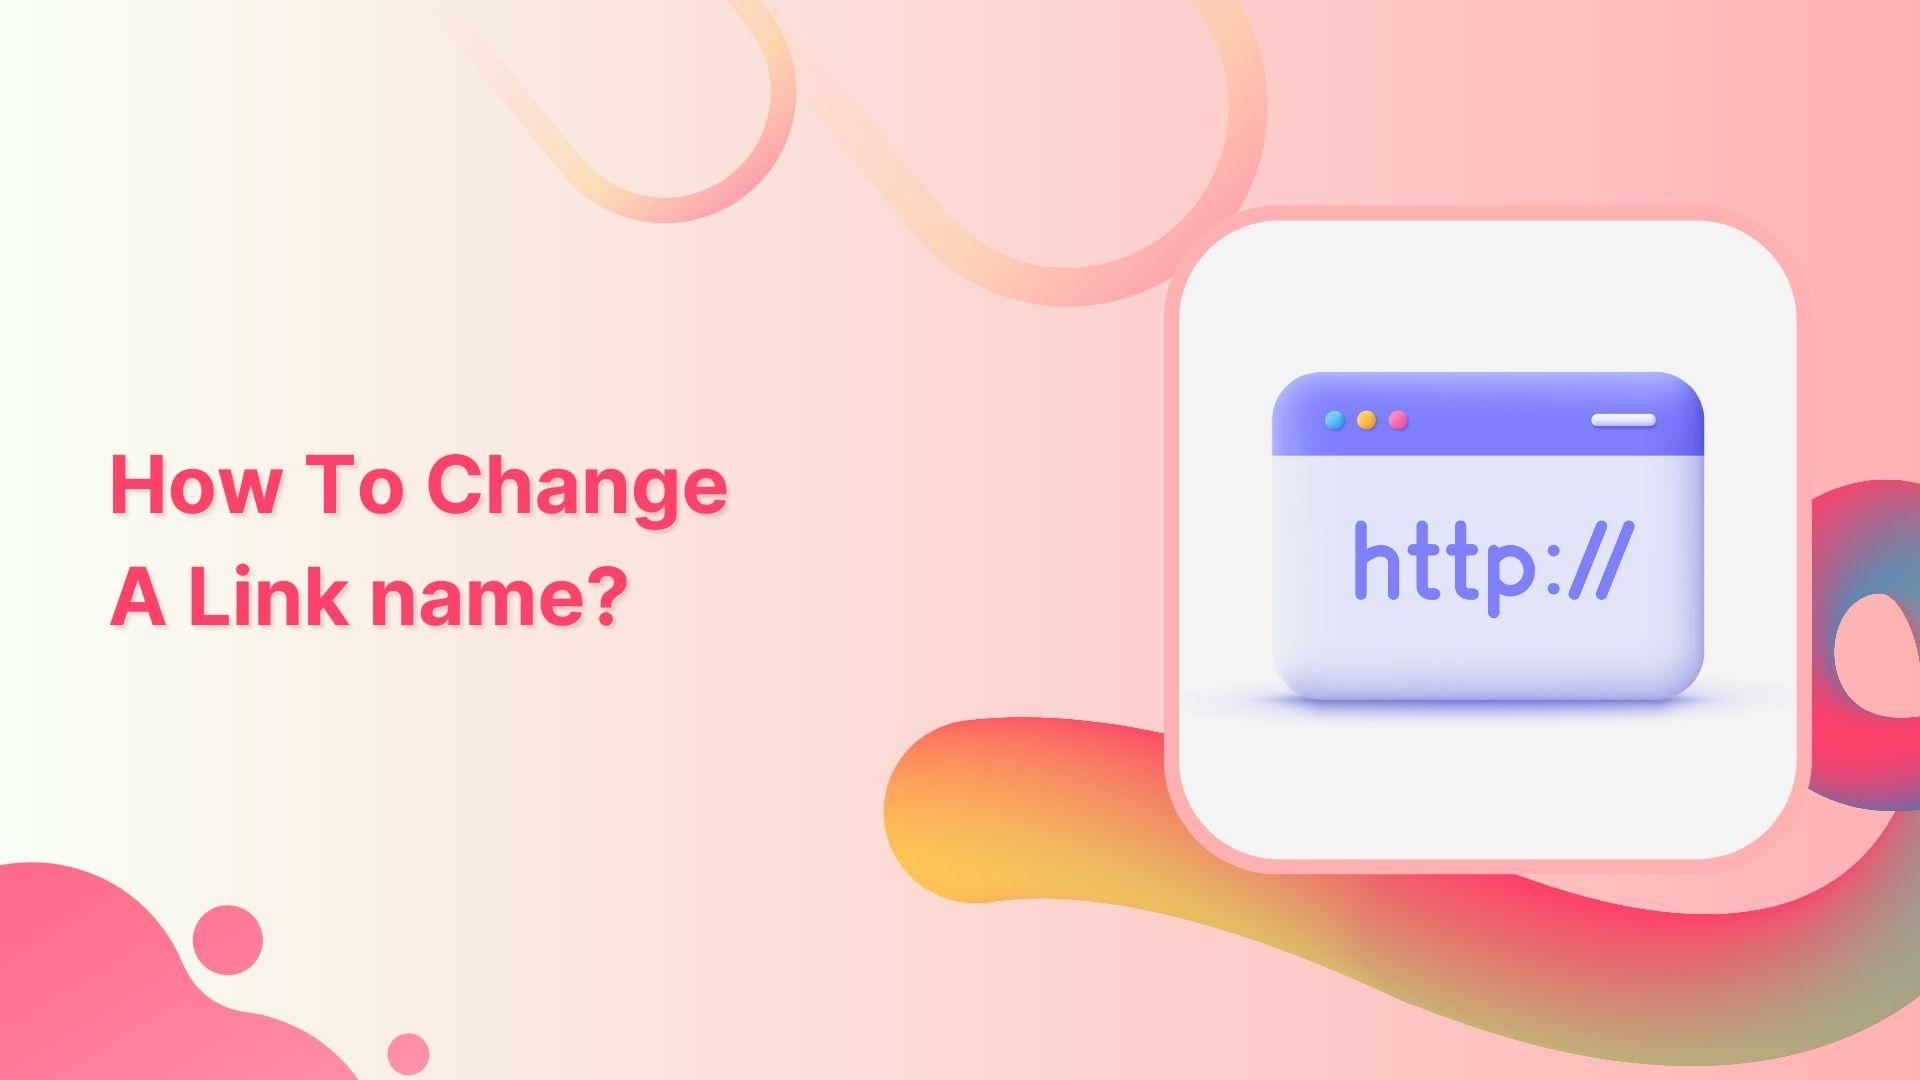 How to change a link name?